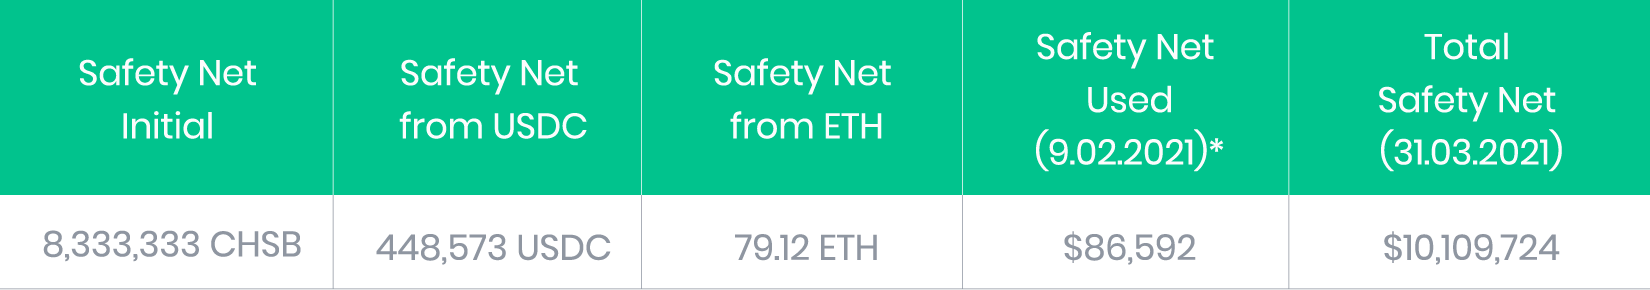 Safety Net level March, 2021